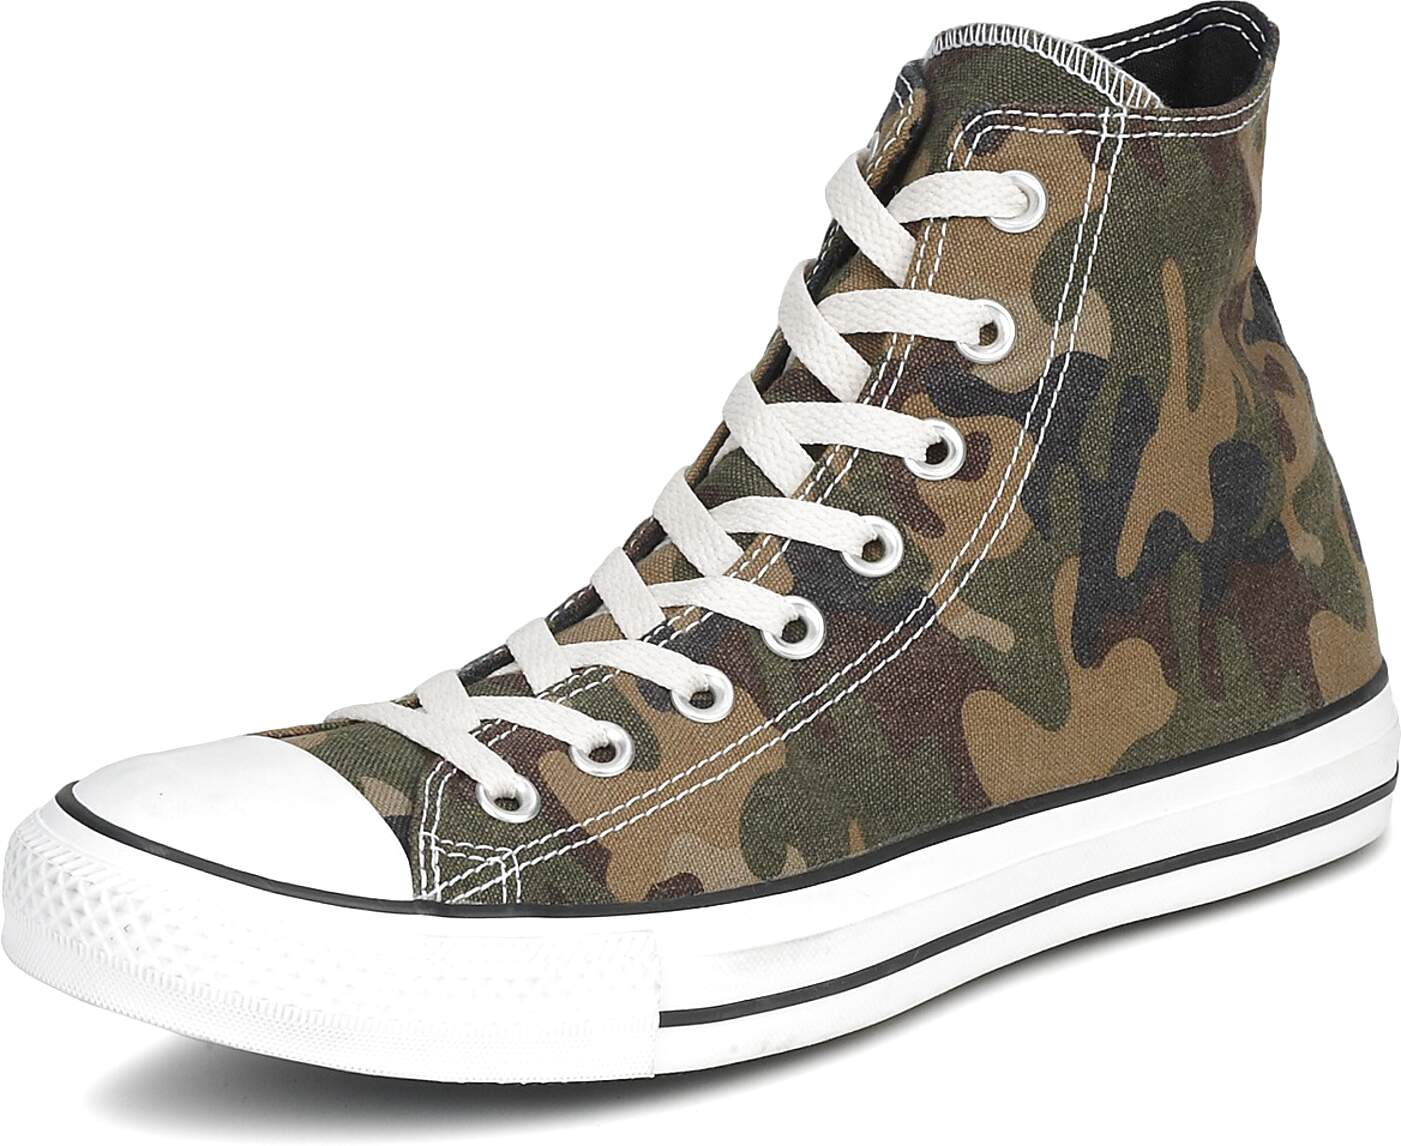 Army Converse for sale in UK 59 used Army Converses